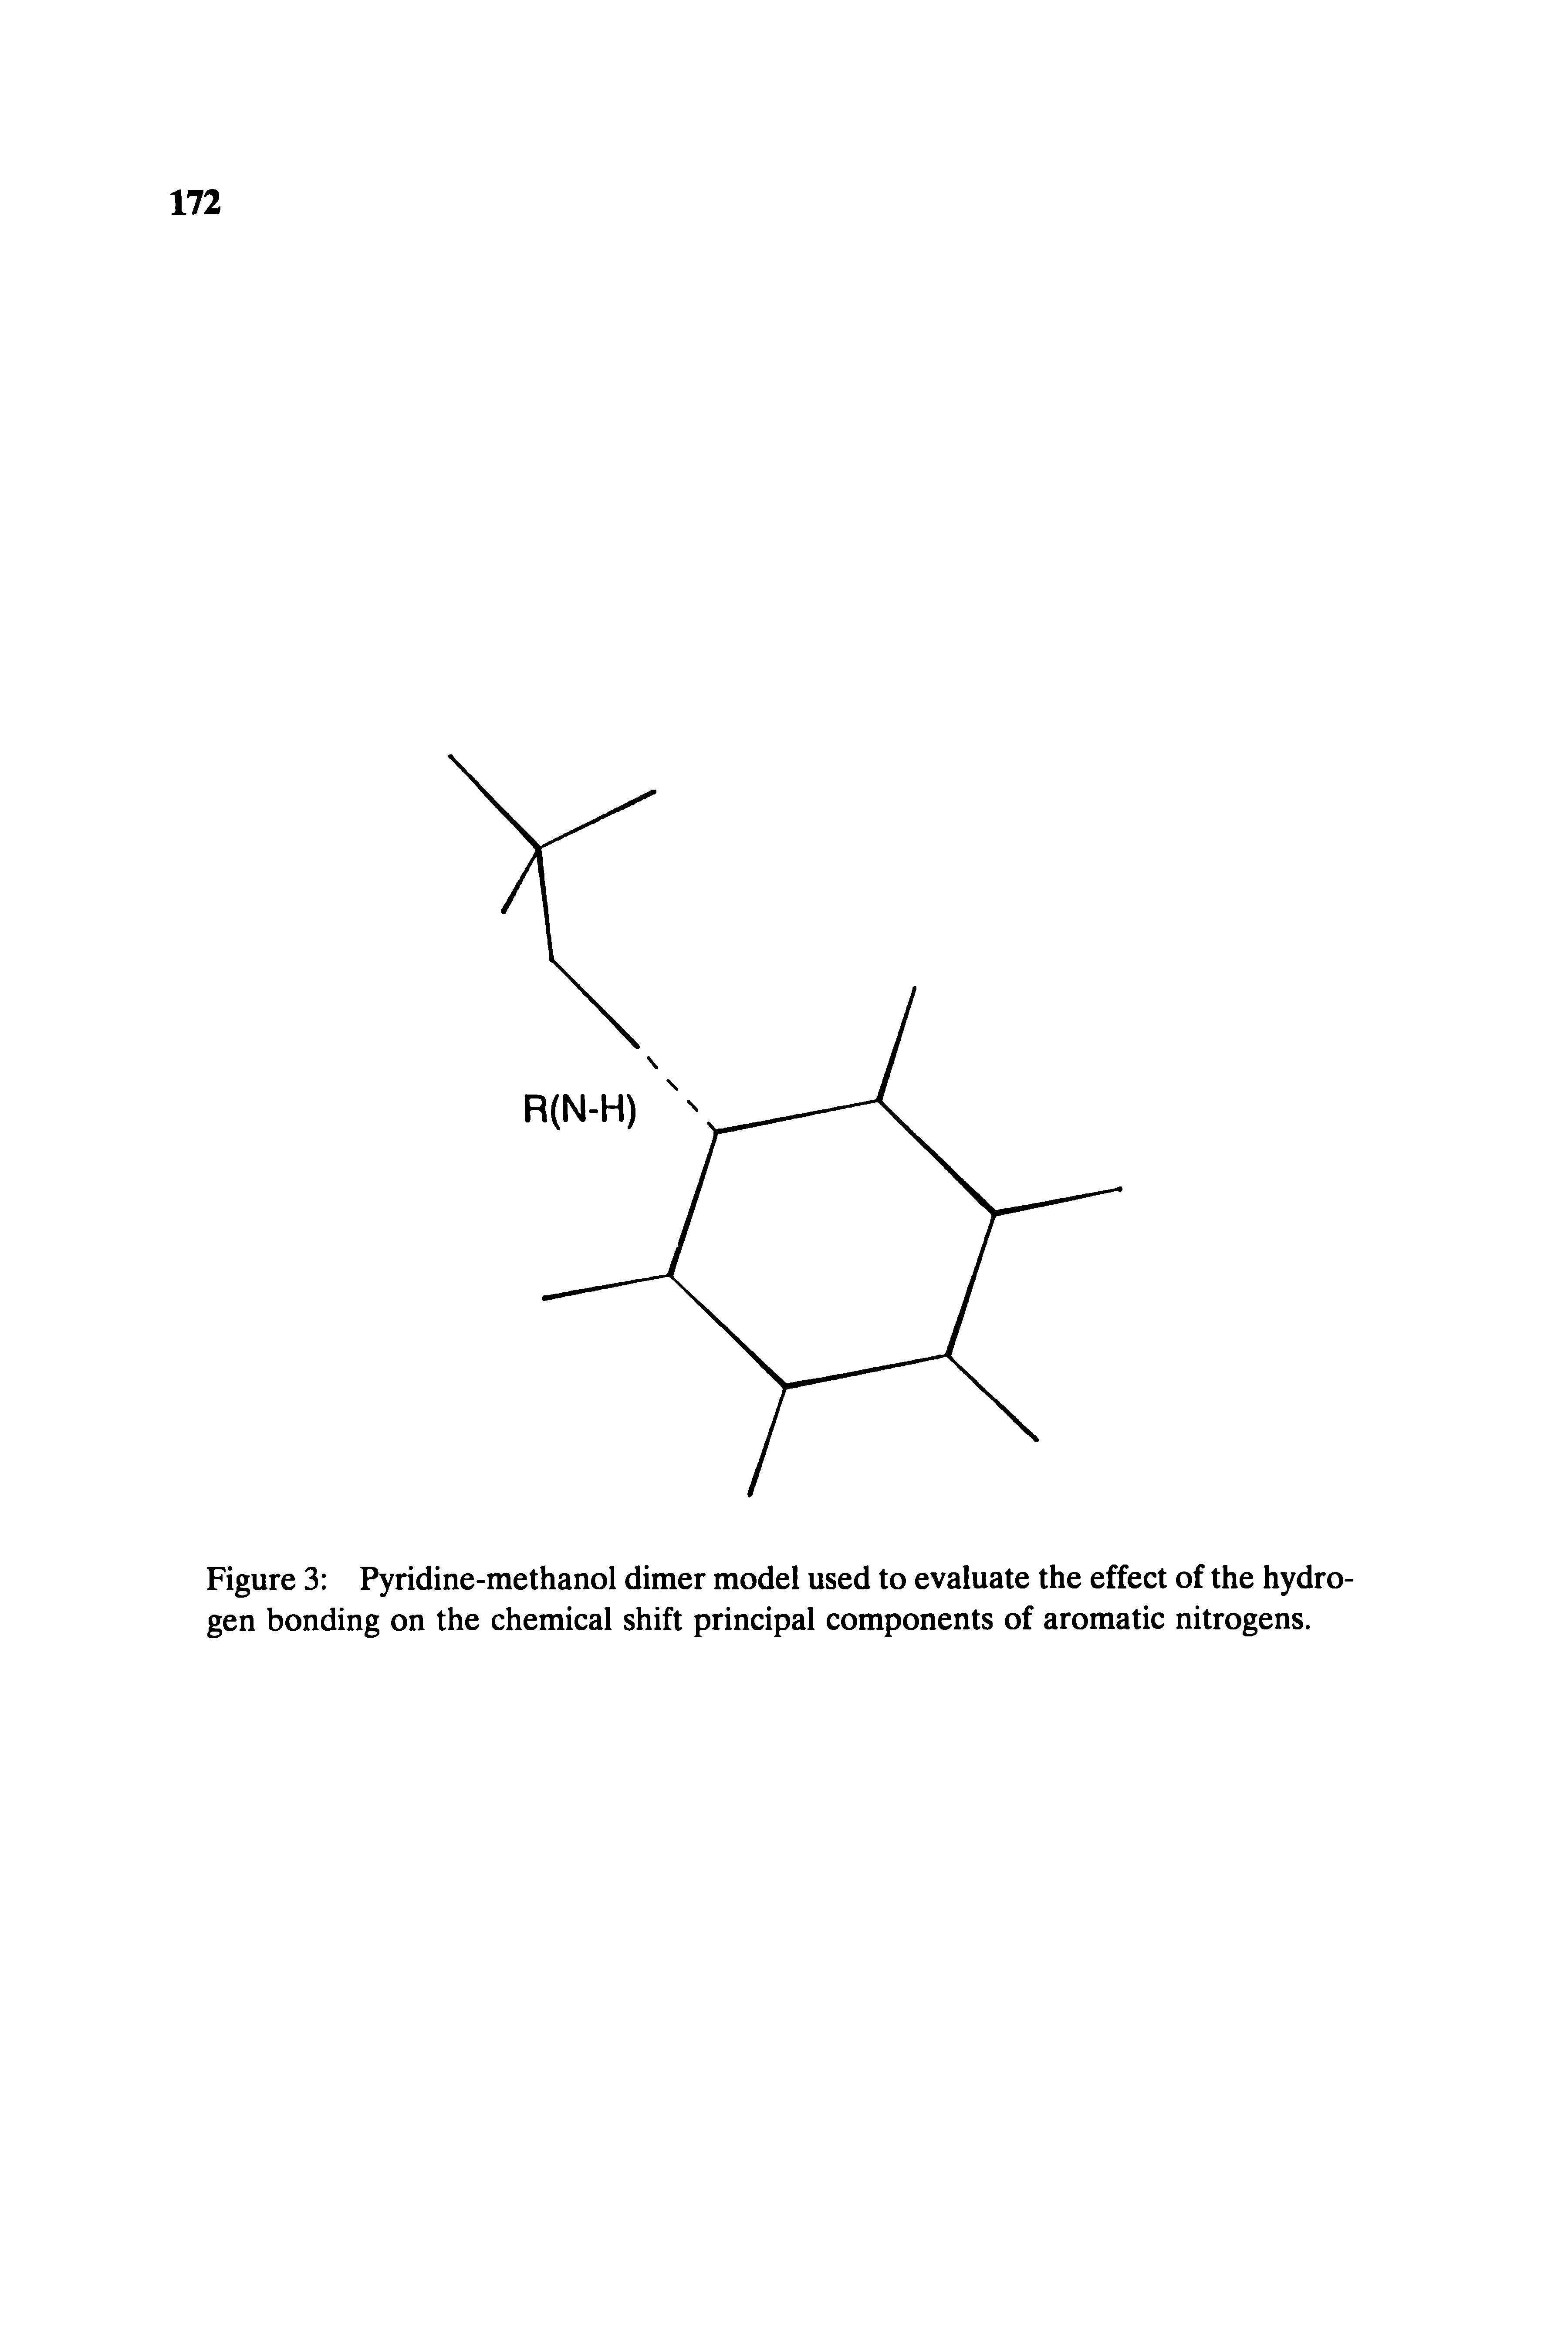 Figure 3 Pyridine-methanol dimer model used to evaluate the effect of the hydrogen bonding on the chemical shift principal components of aromatic nitrogens.